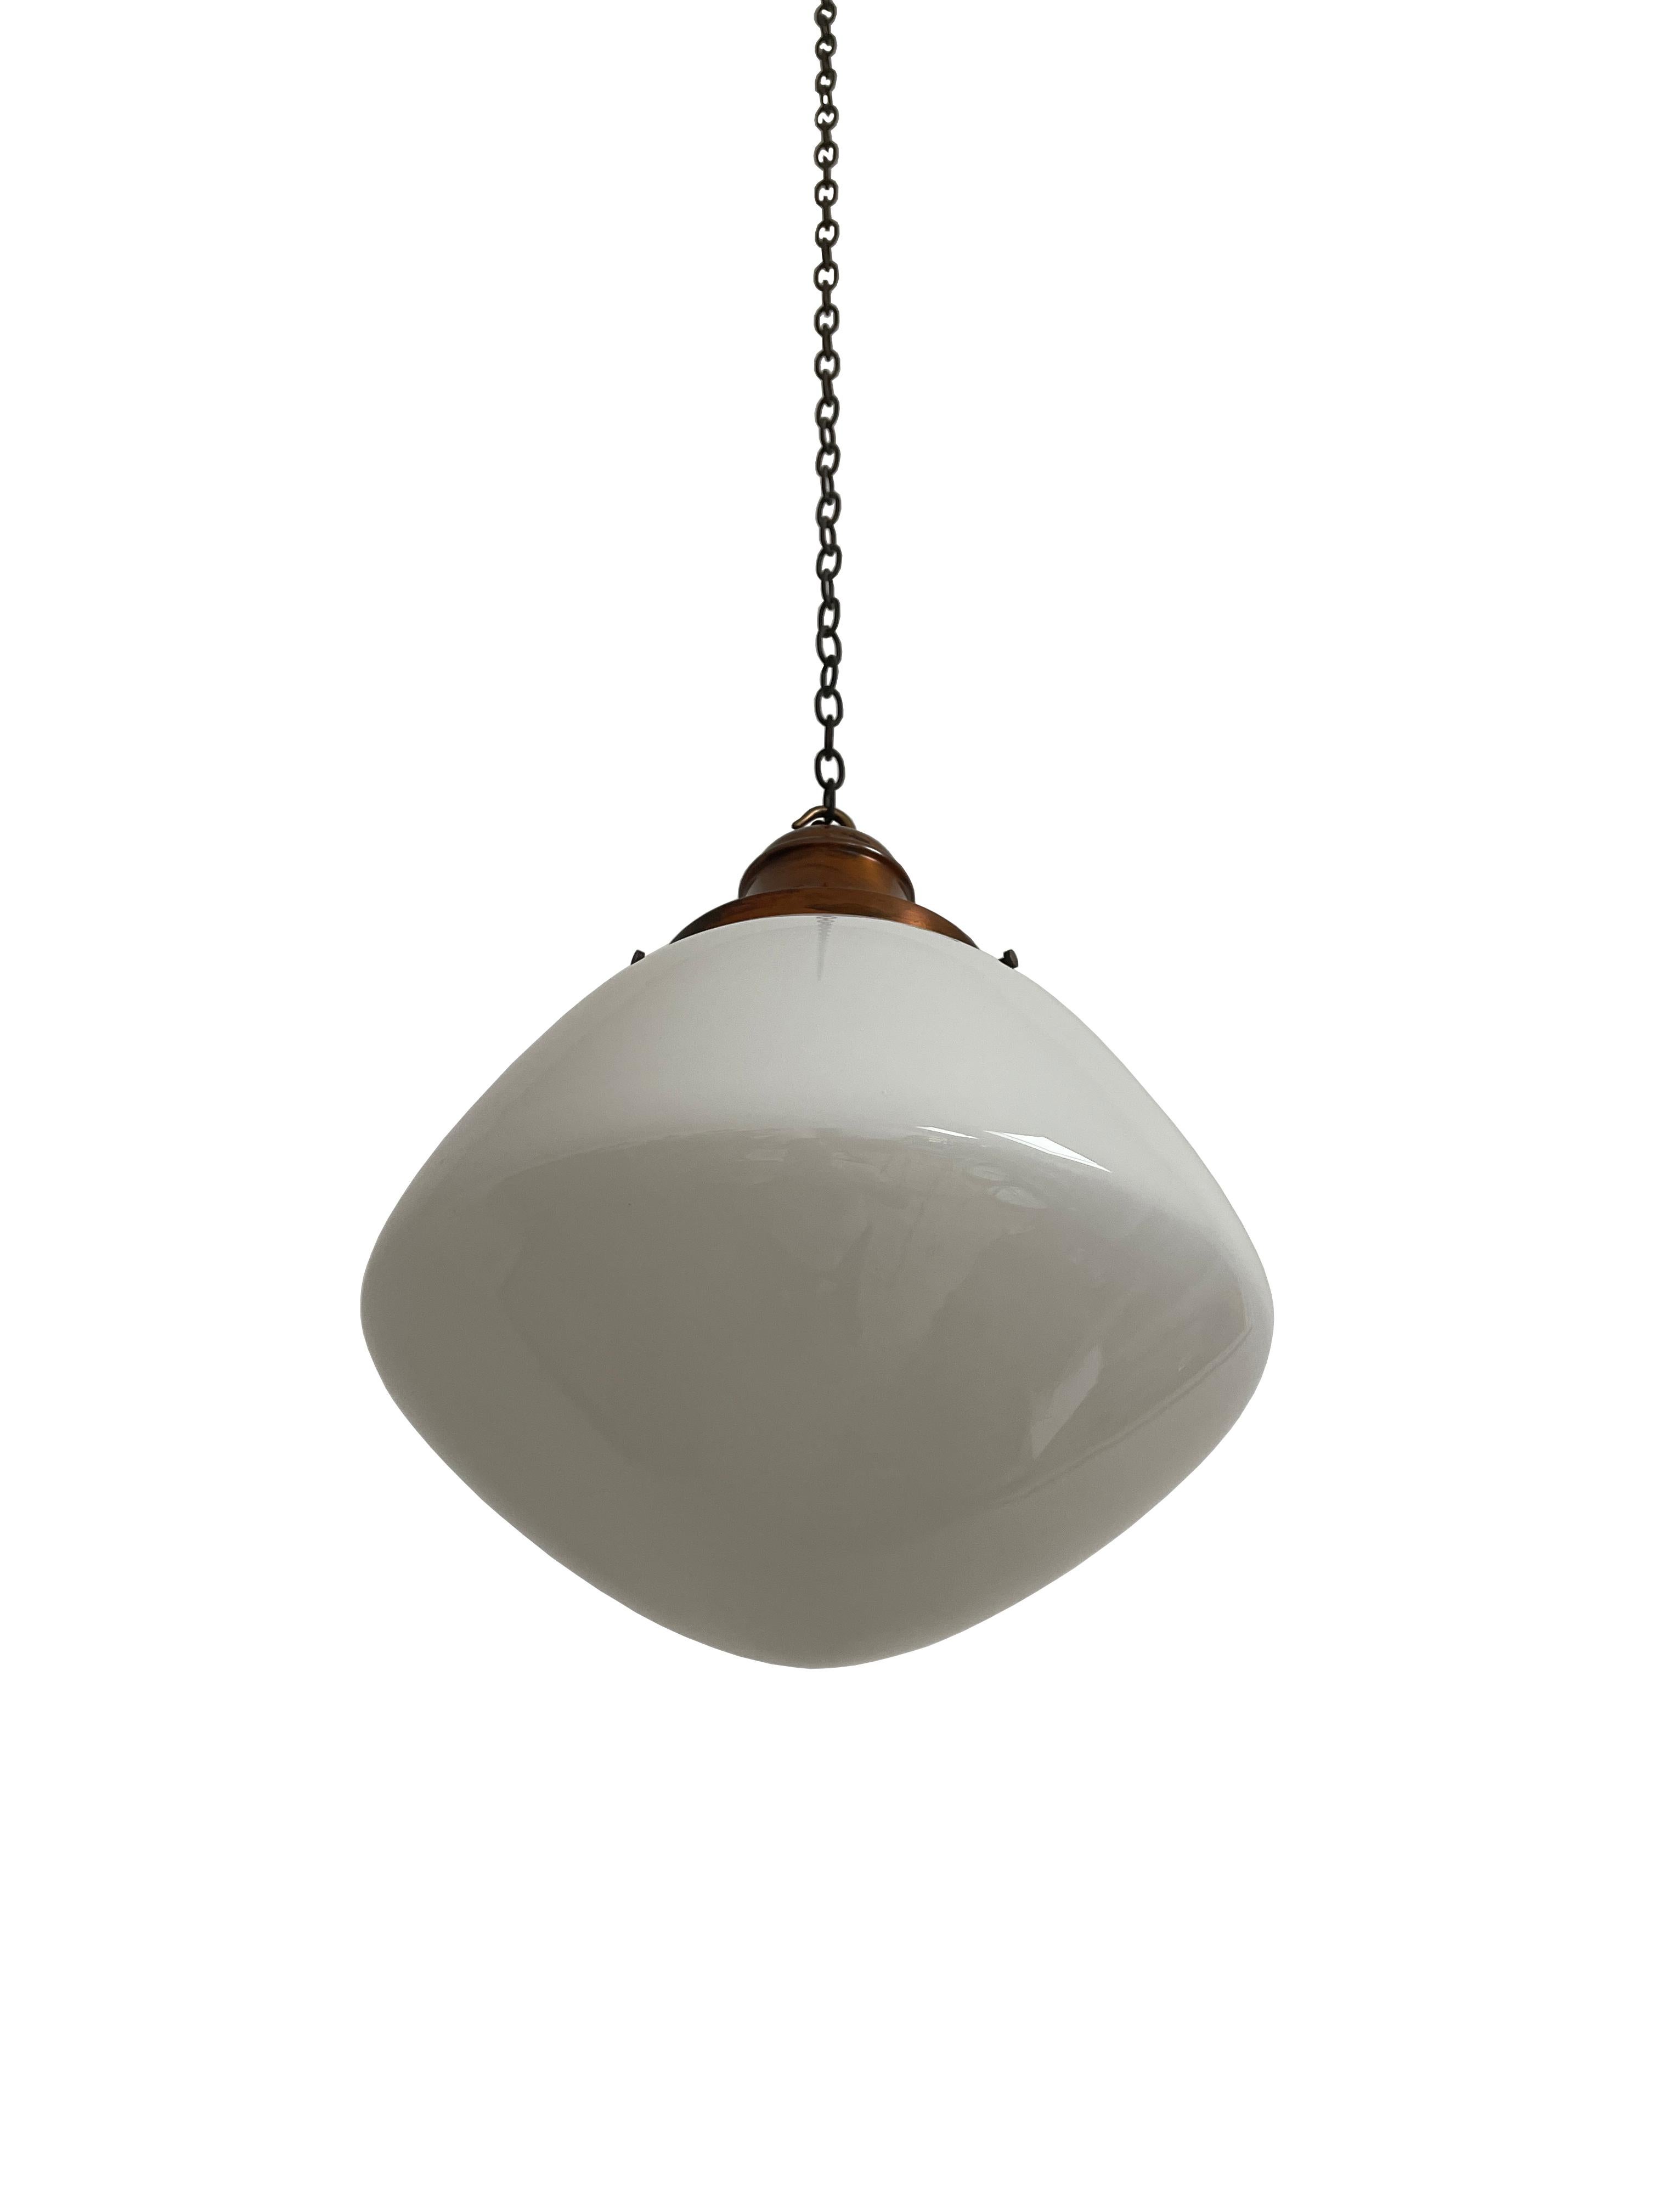 - A beautiful and all original church opaline pendant light with gallery, English circa 1930.
- Tremendous bulbous shape to the opaline, wear commensurate with age, all in excellent condition.
- Height 45cm, Width 35cm, Depth 35cm.
- Rewired with